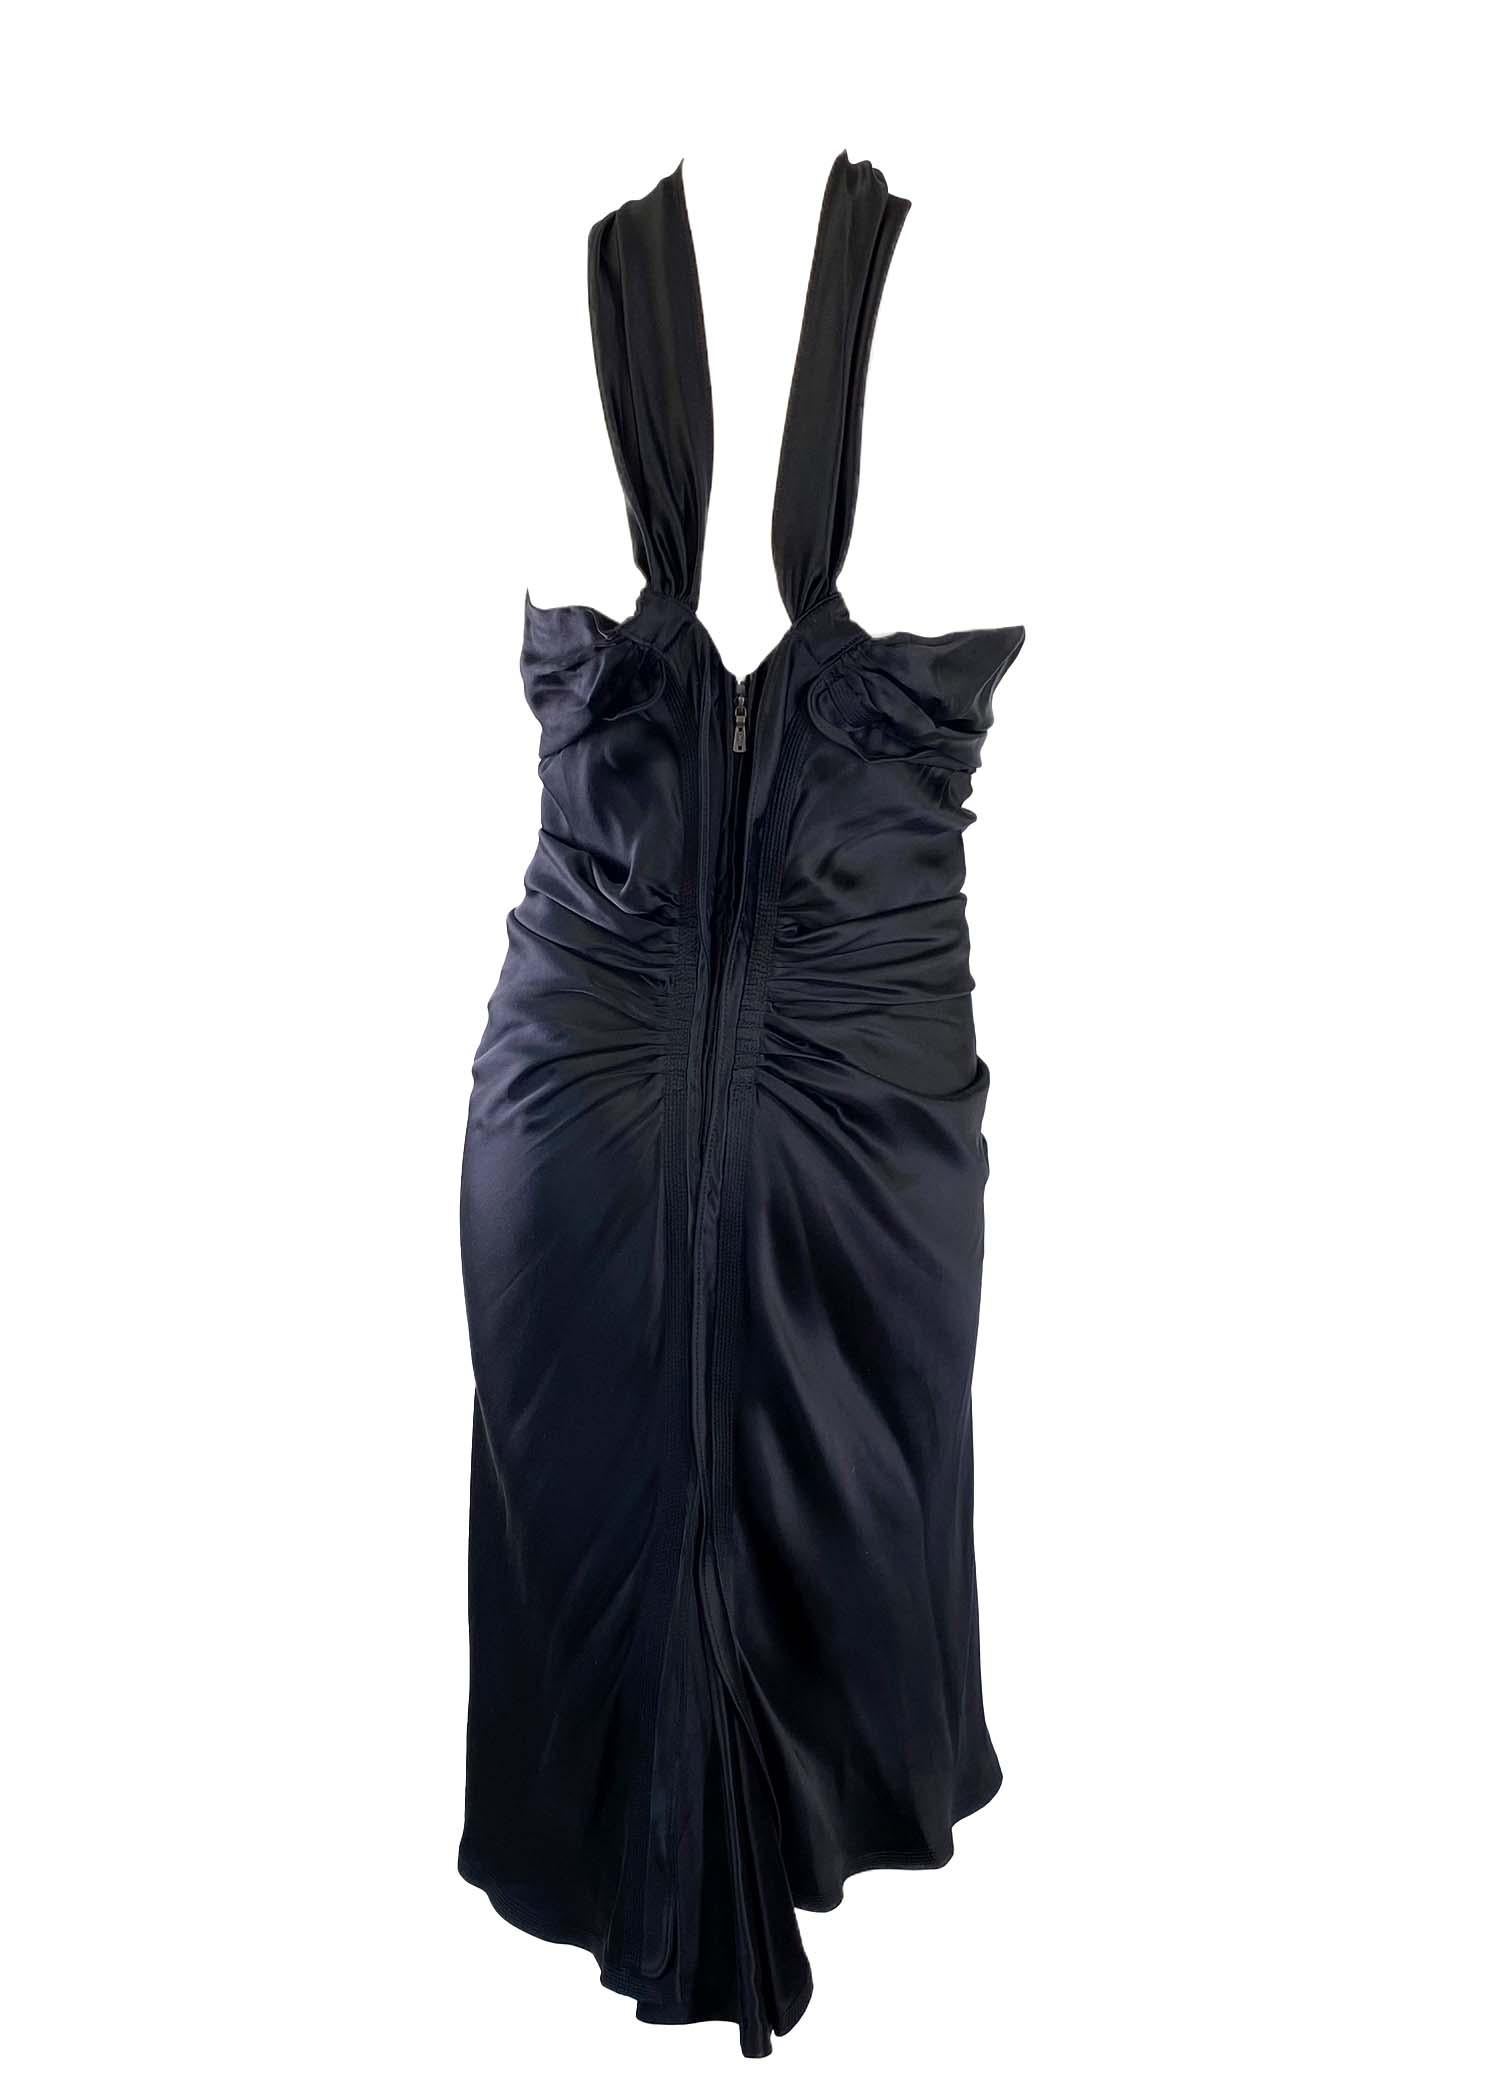 F/W 2003 Yves Saint Laurent by Tom Ford Black Silk Ruched Ruffle Cocktail Dress For Sale 4